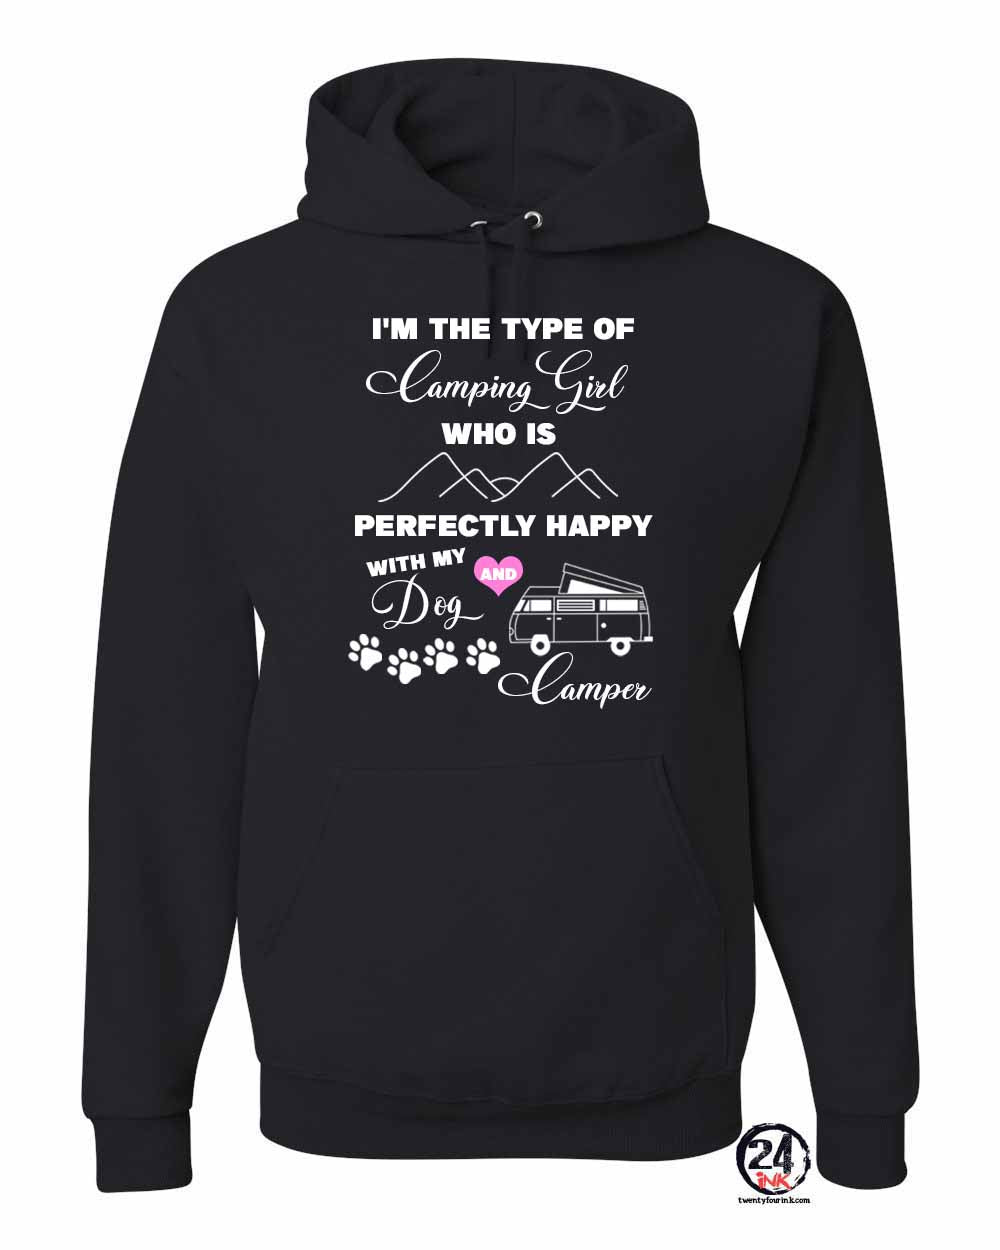 Dogs and Camping Hooded Sweatshirt